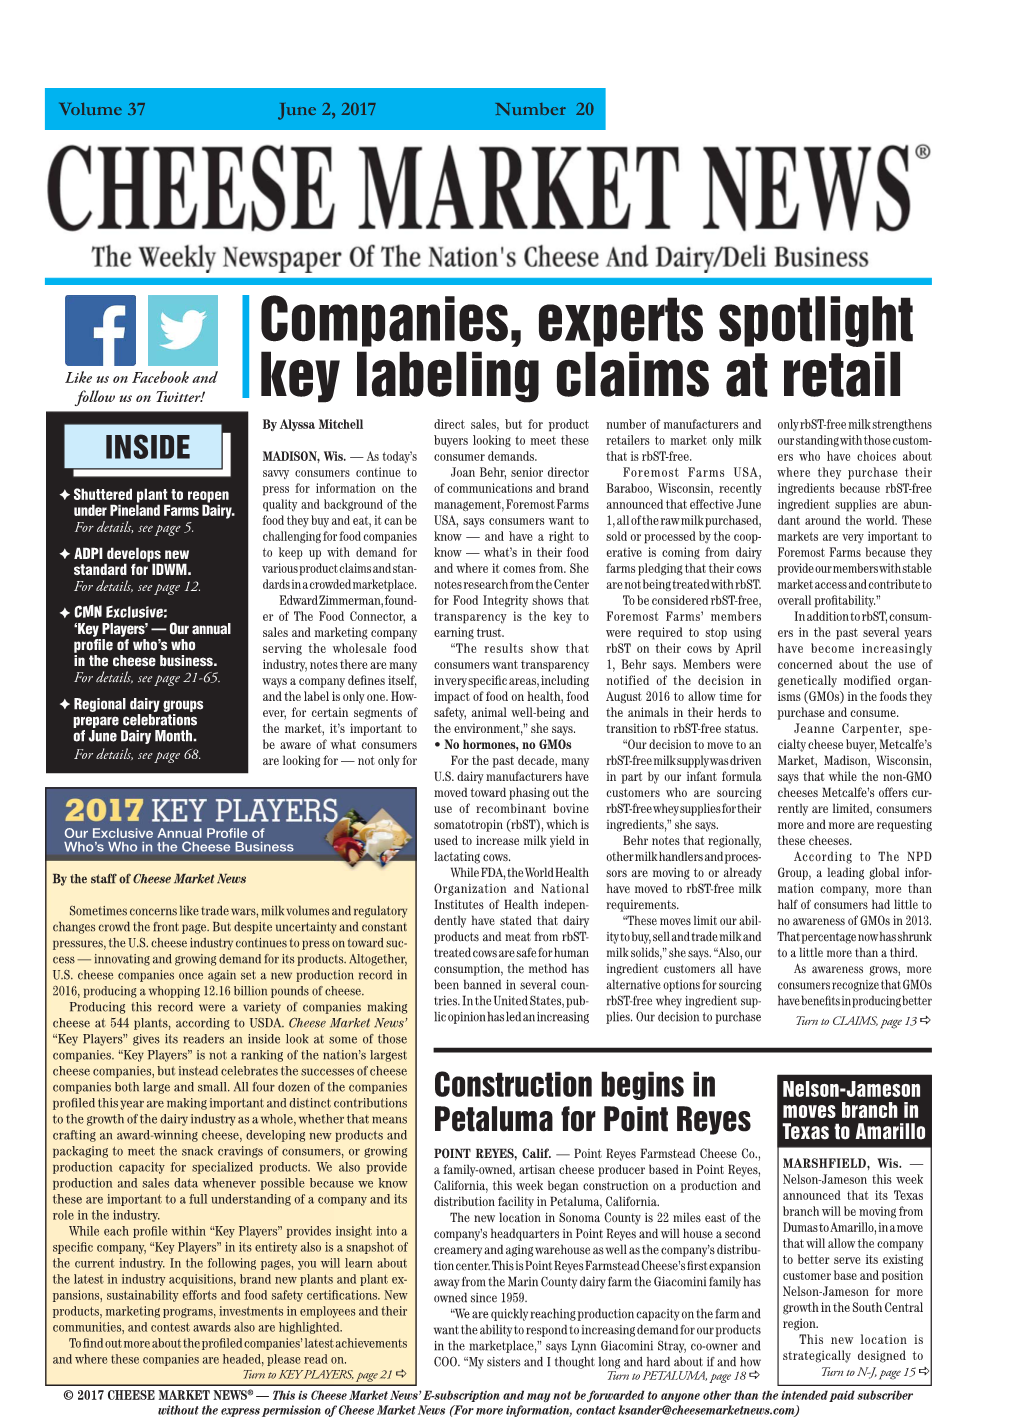 Companies, Experts Spotlight Key Labeling Claims at Retail